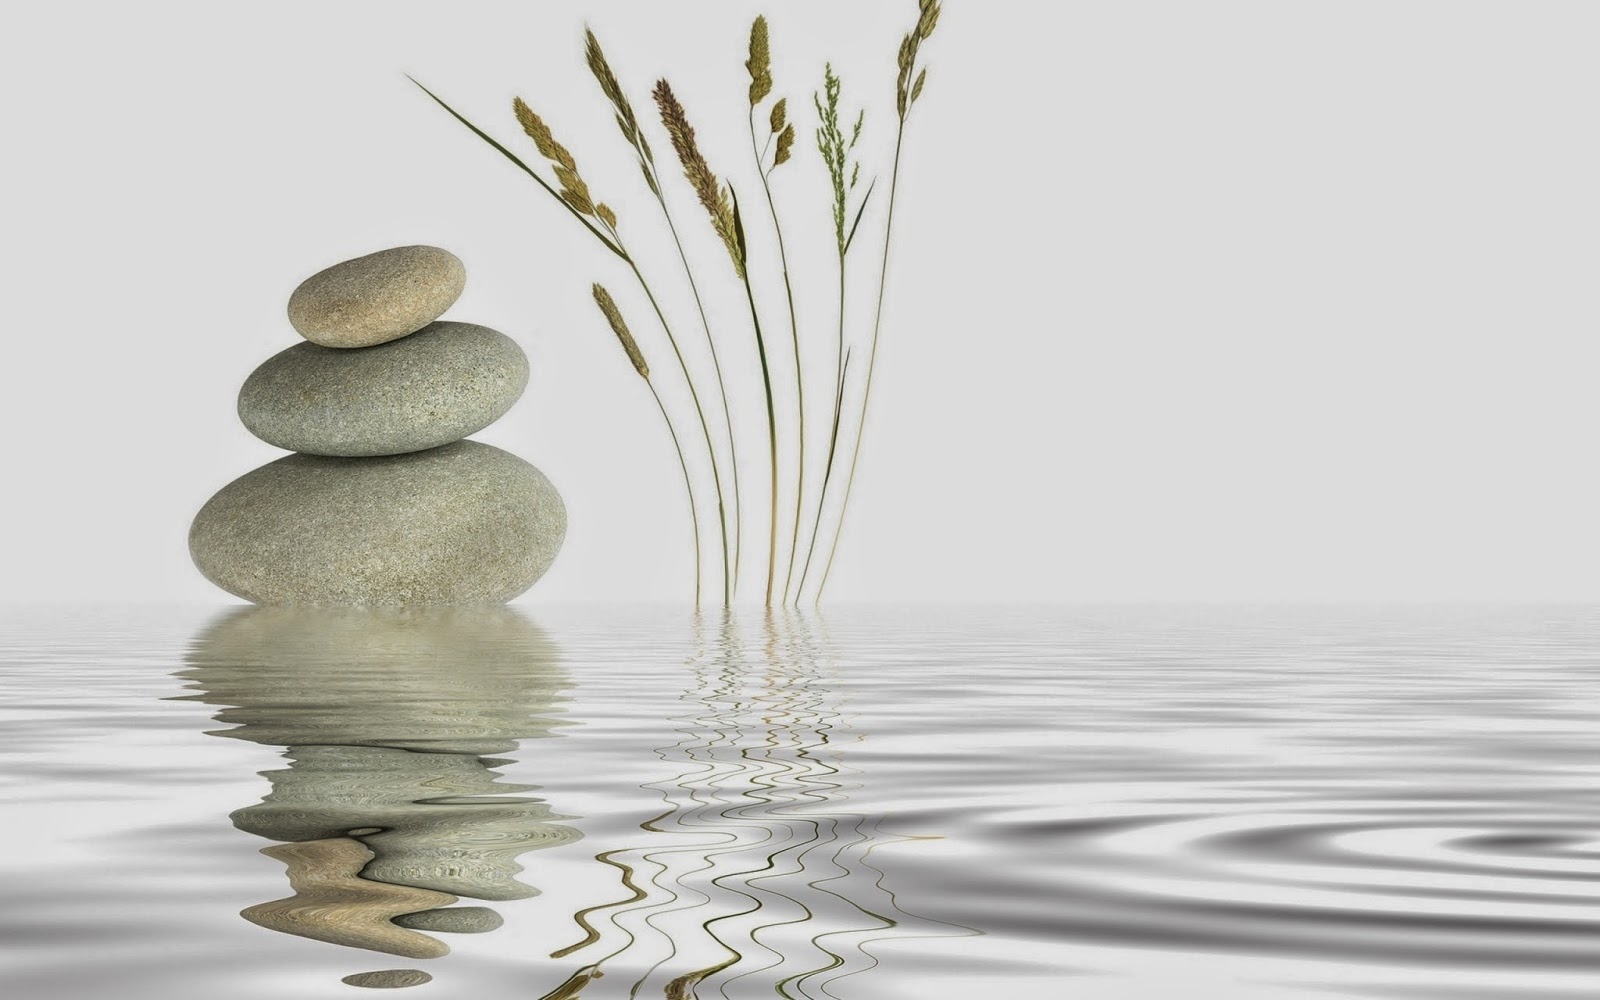 White Zen Stone With Water Background Wallpaper For Mac Pc Jpg